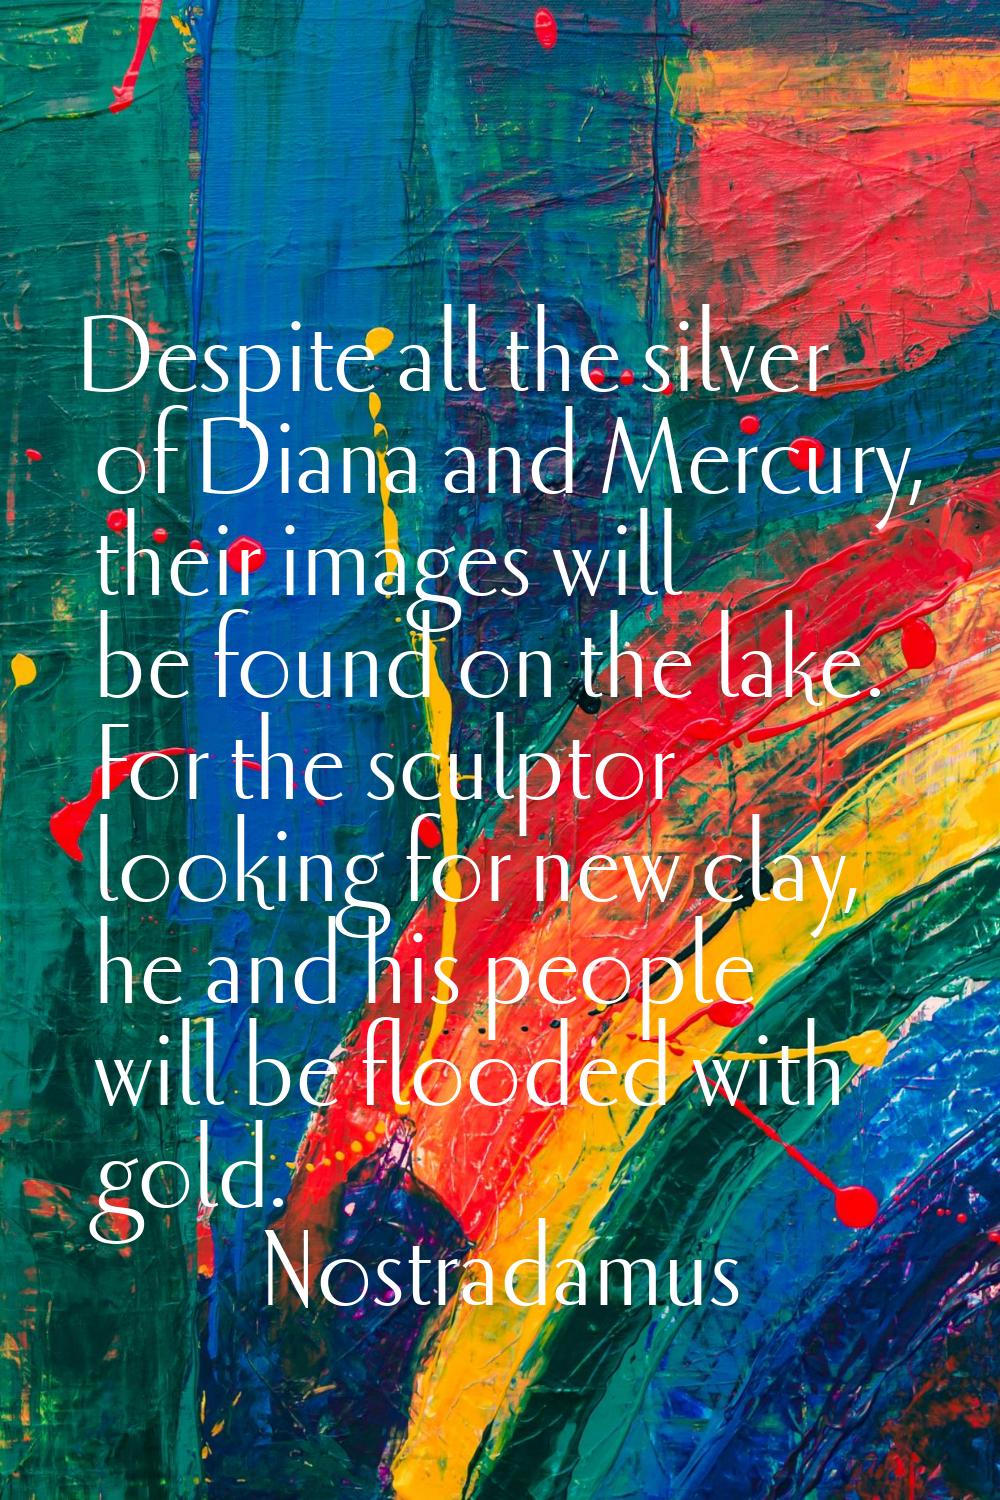 Despite all the silver of Diana and Mercury, their images will be found on the lake. For the sculpt